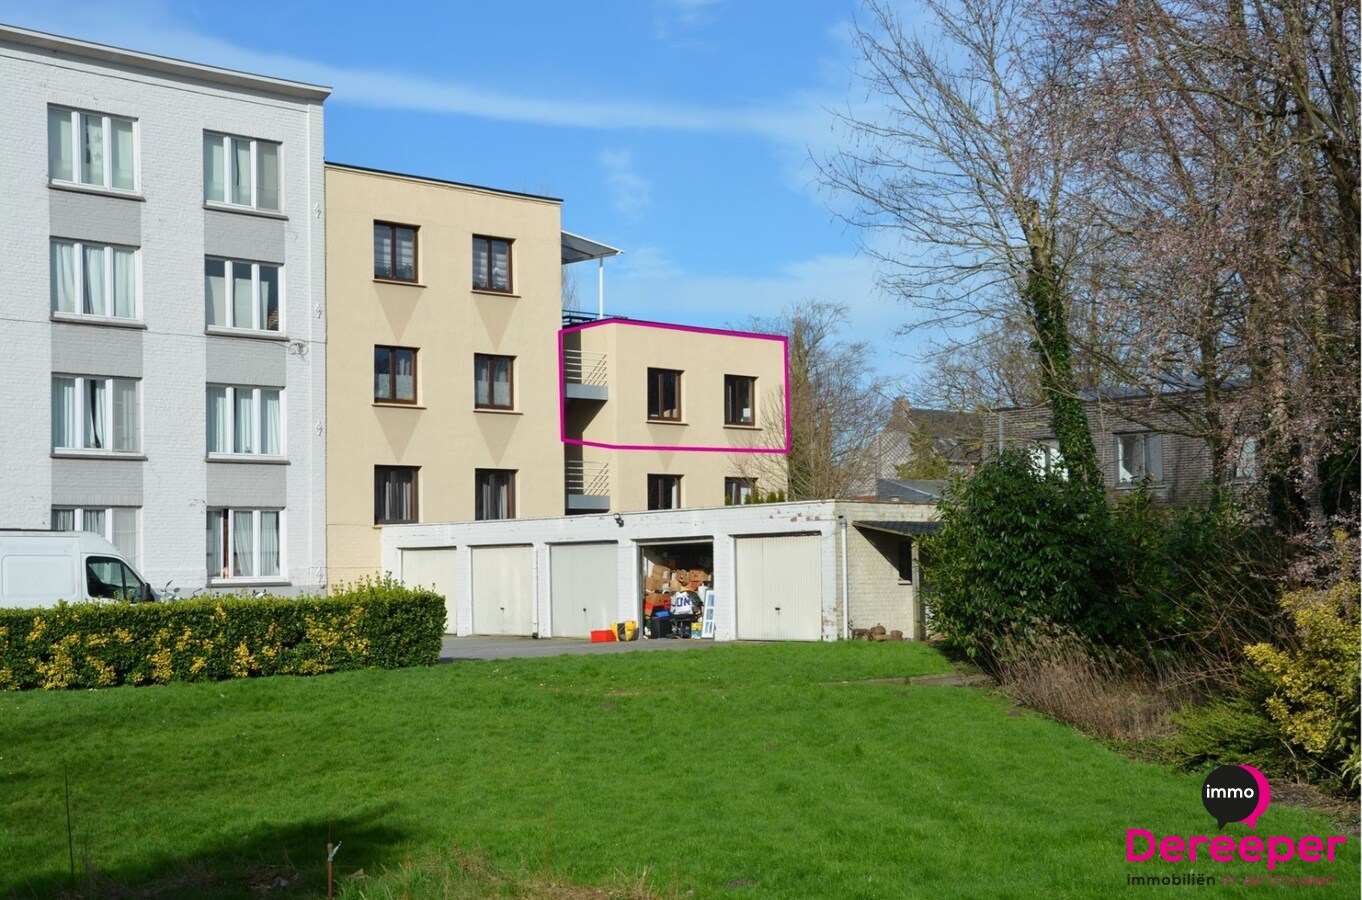 Te huur - Appartement - Gistel